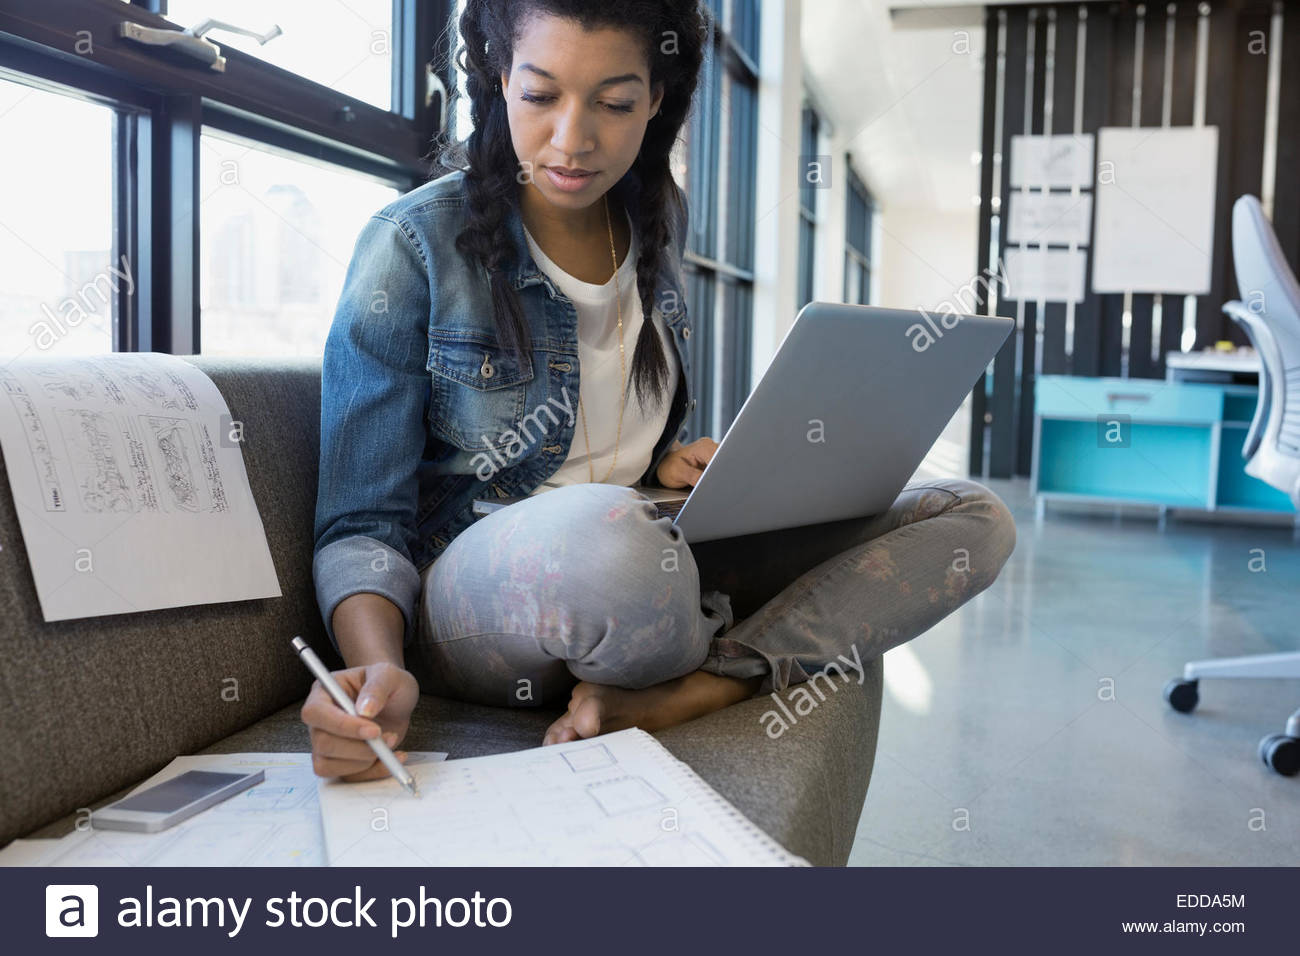 Designer working at laptop on sofa in office Banque D'Images